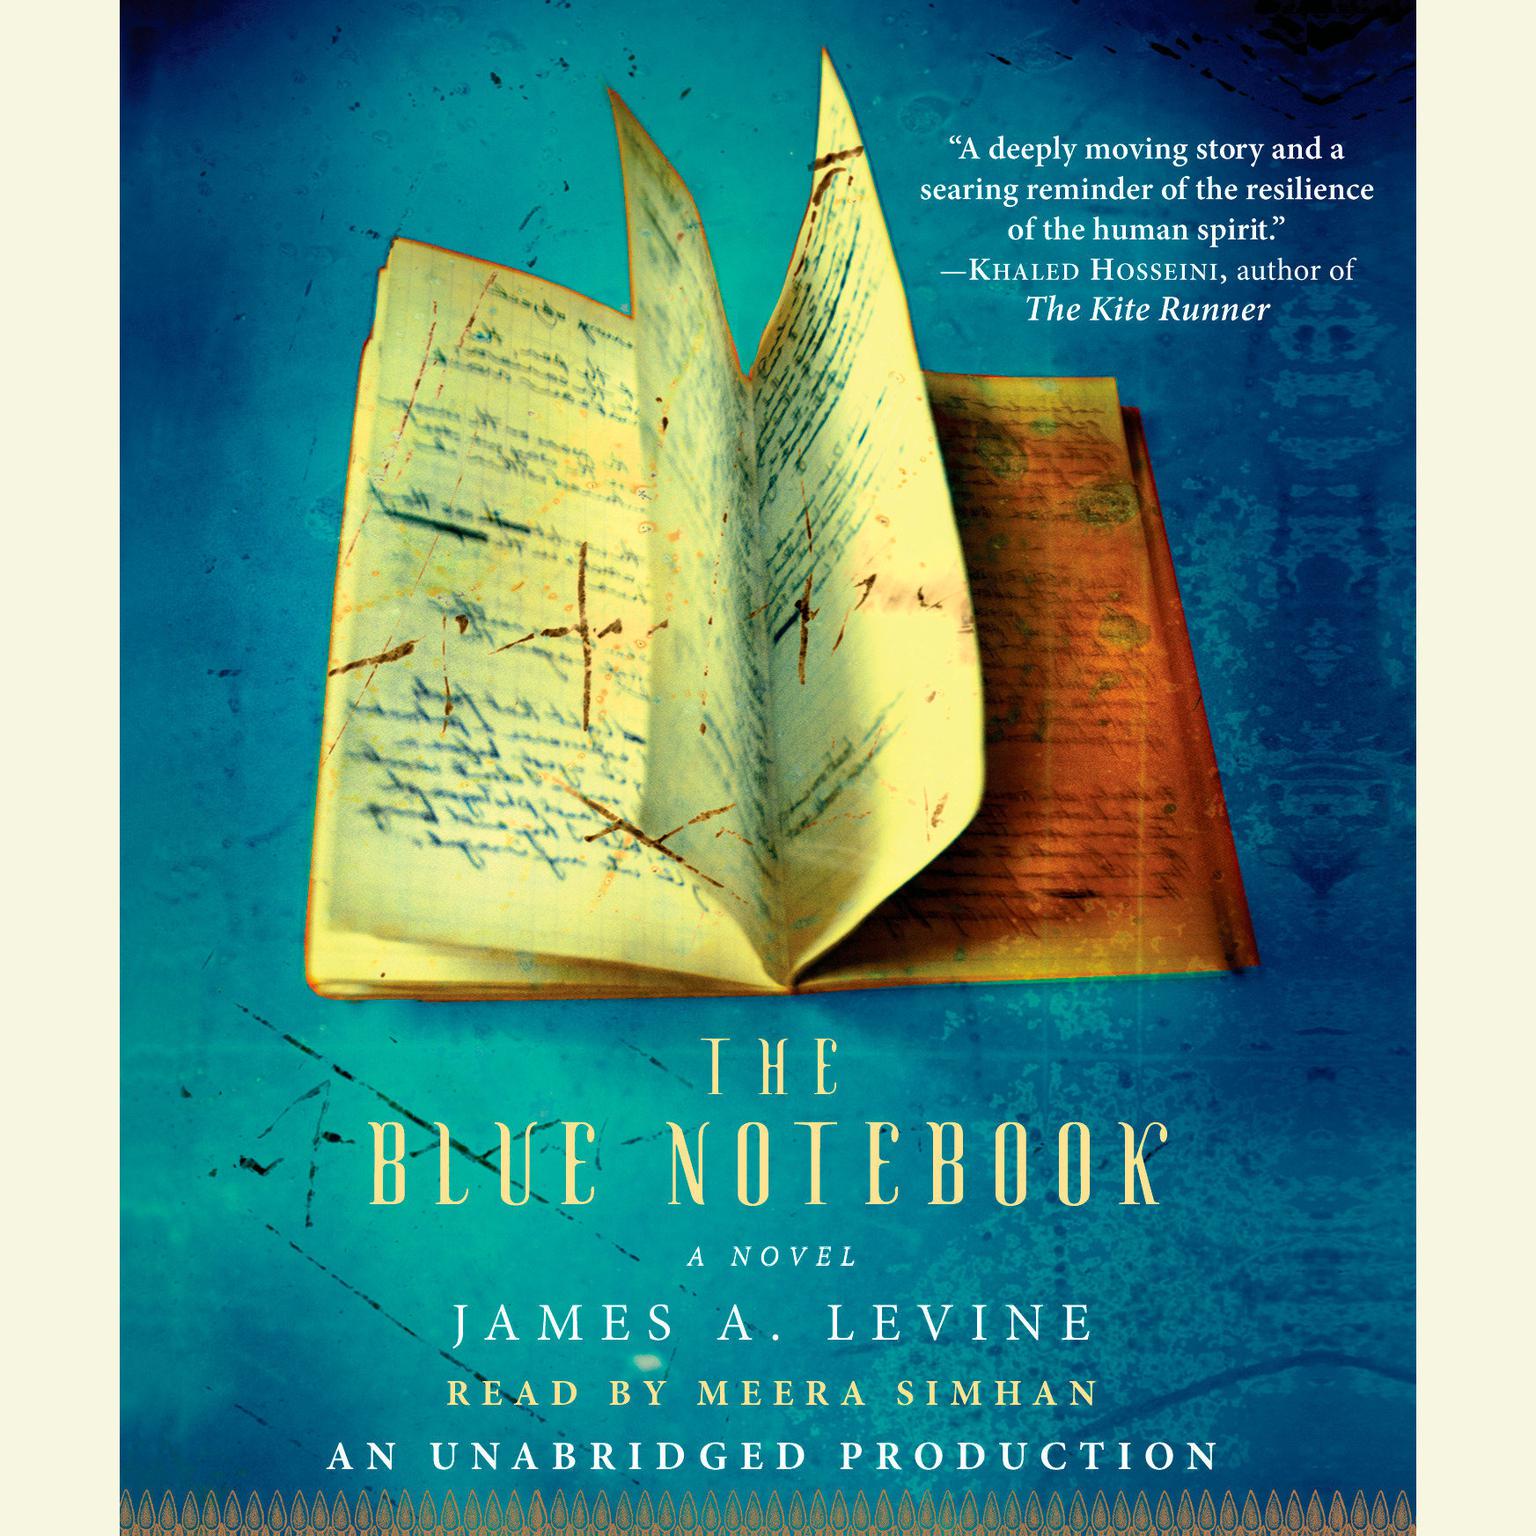 The Blue Notebook: A Novel Audiobook, by James A. Levine